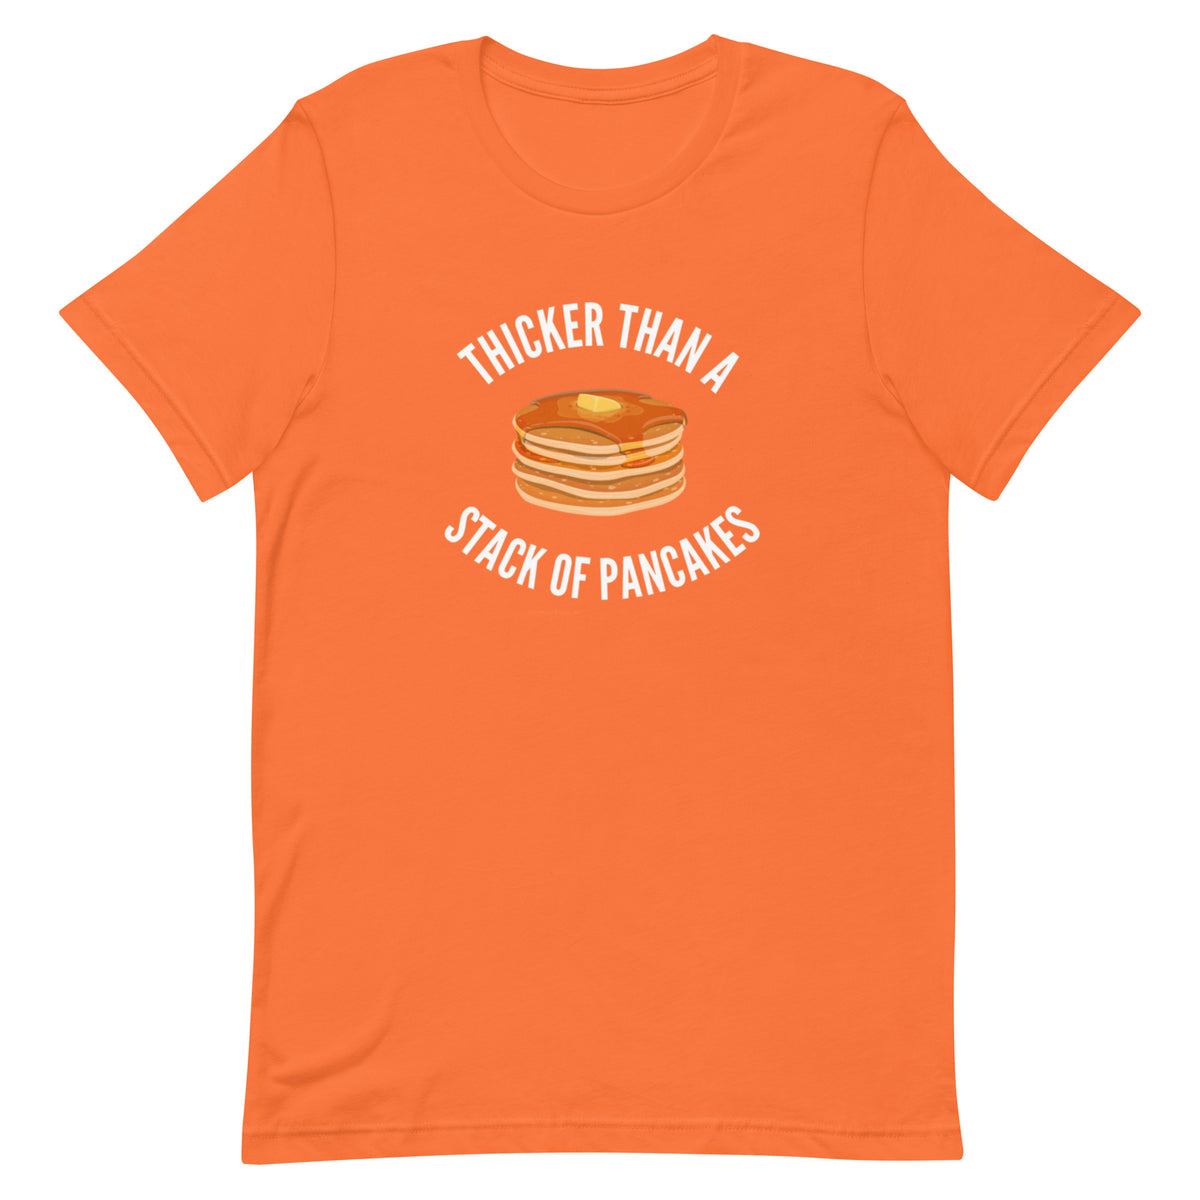 Thicker Than A Stack Of Pancakes T-Shirt